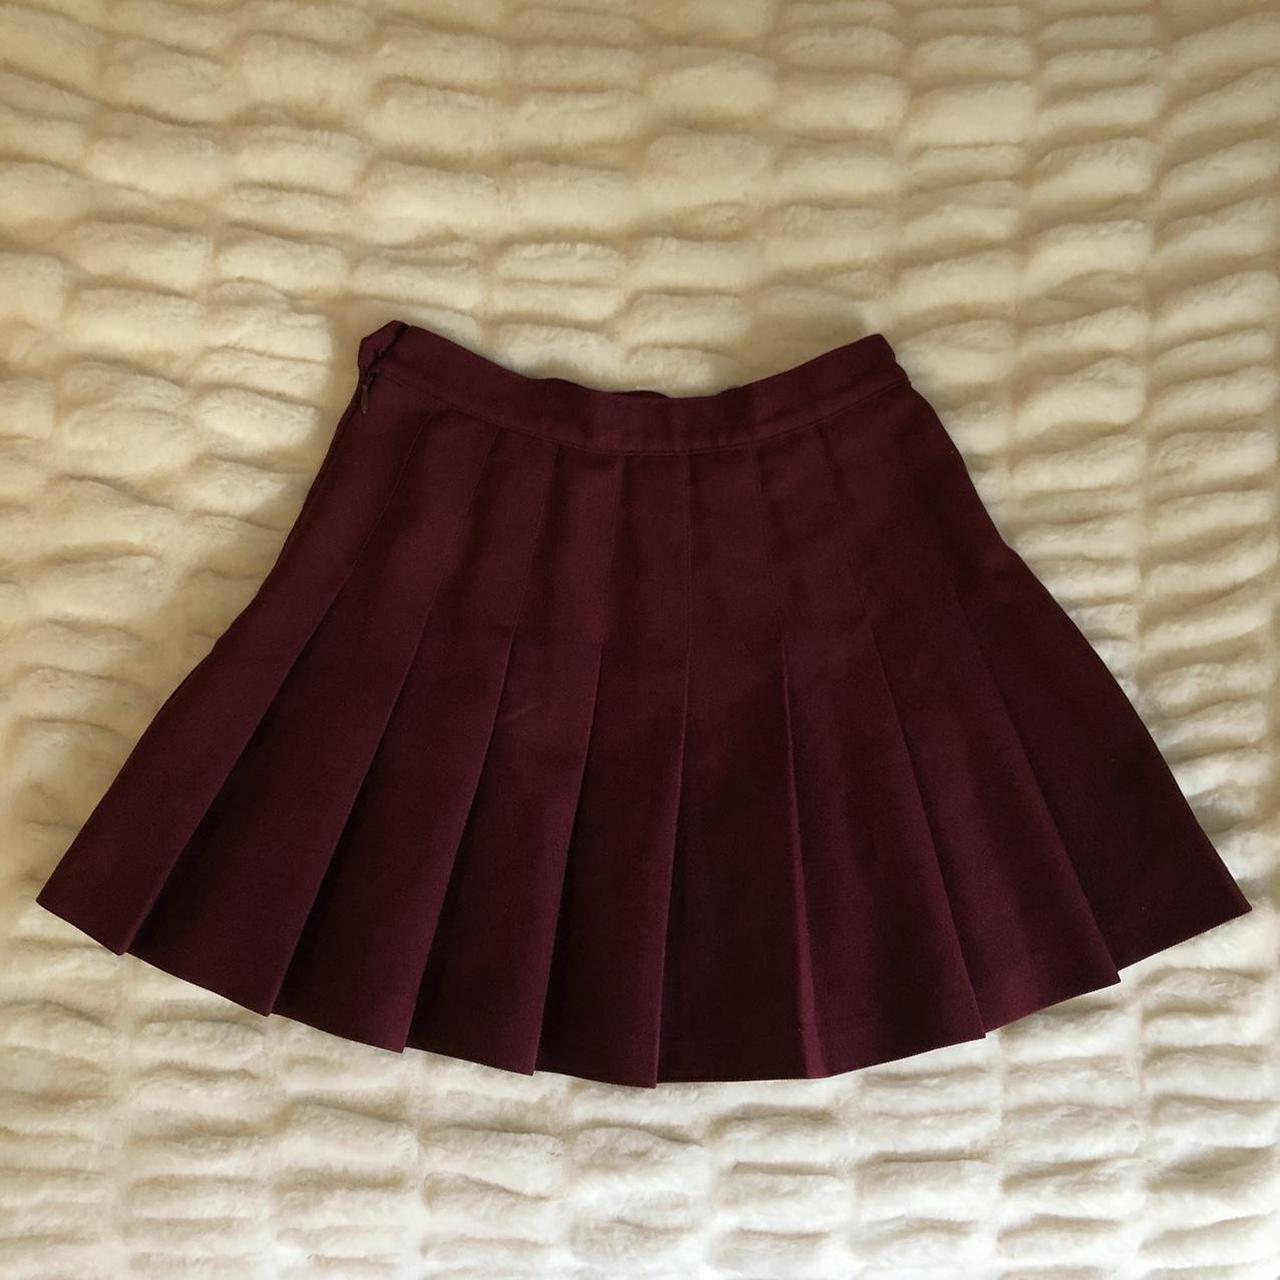 American Apparel Women's Burgundy and Red Skirt (2)